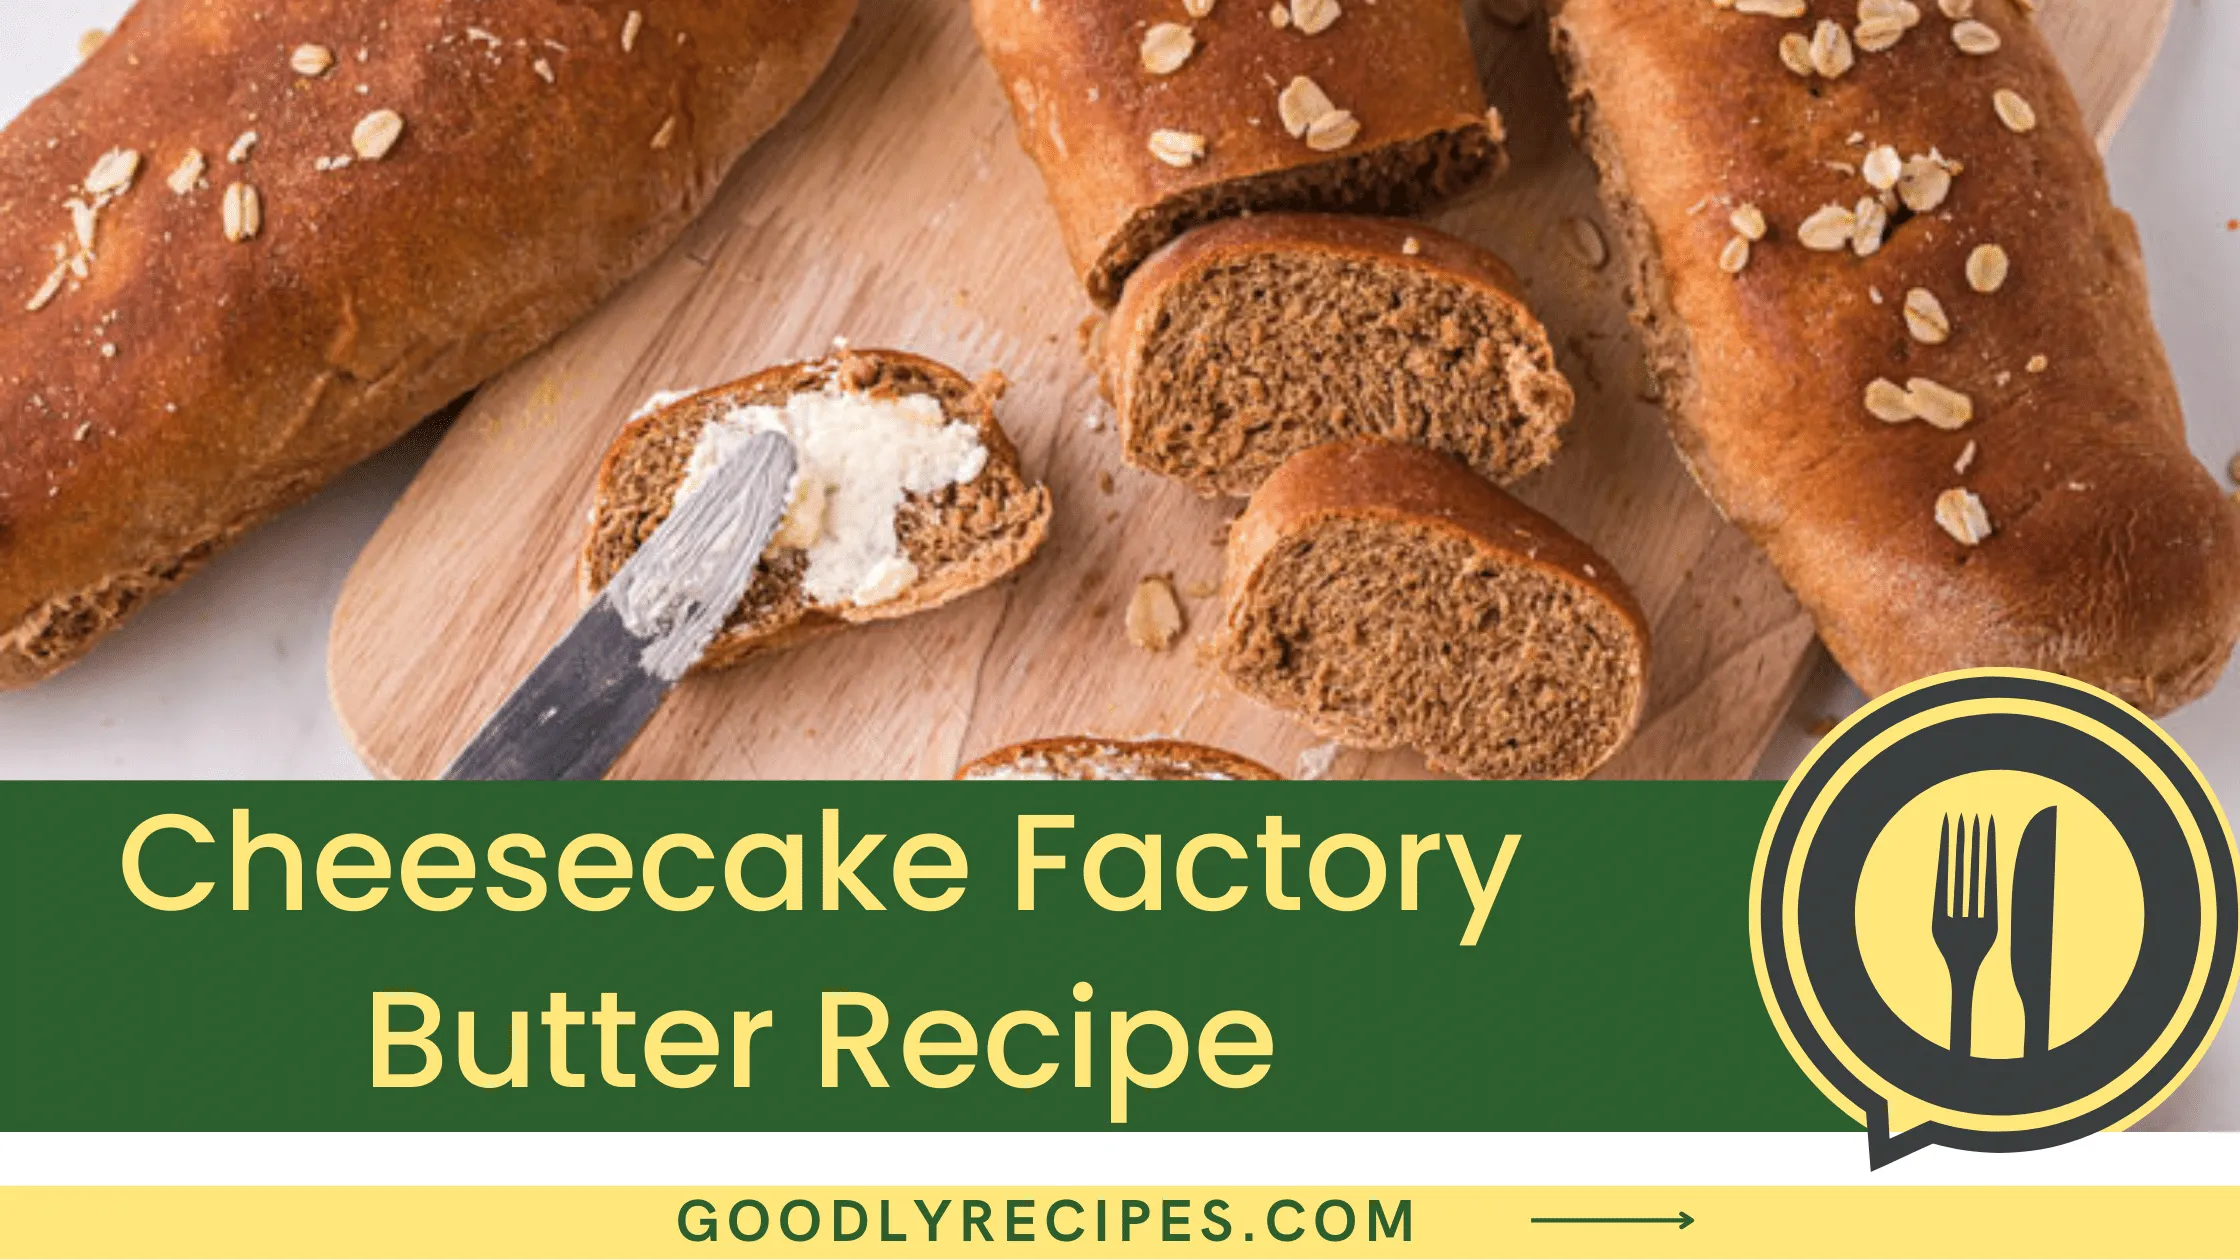 What is Cheesecake Factory Butter?